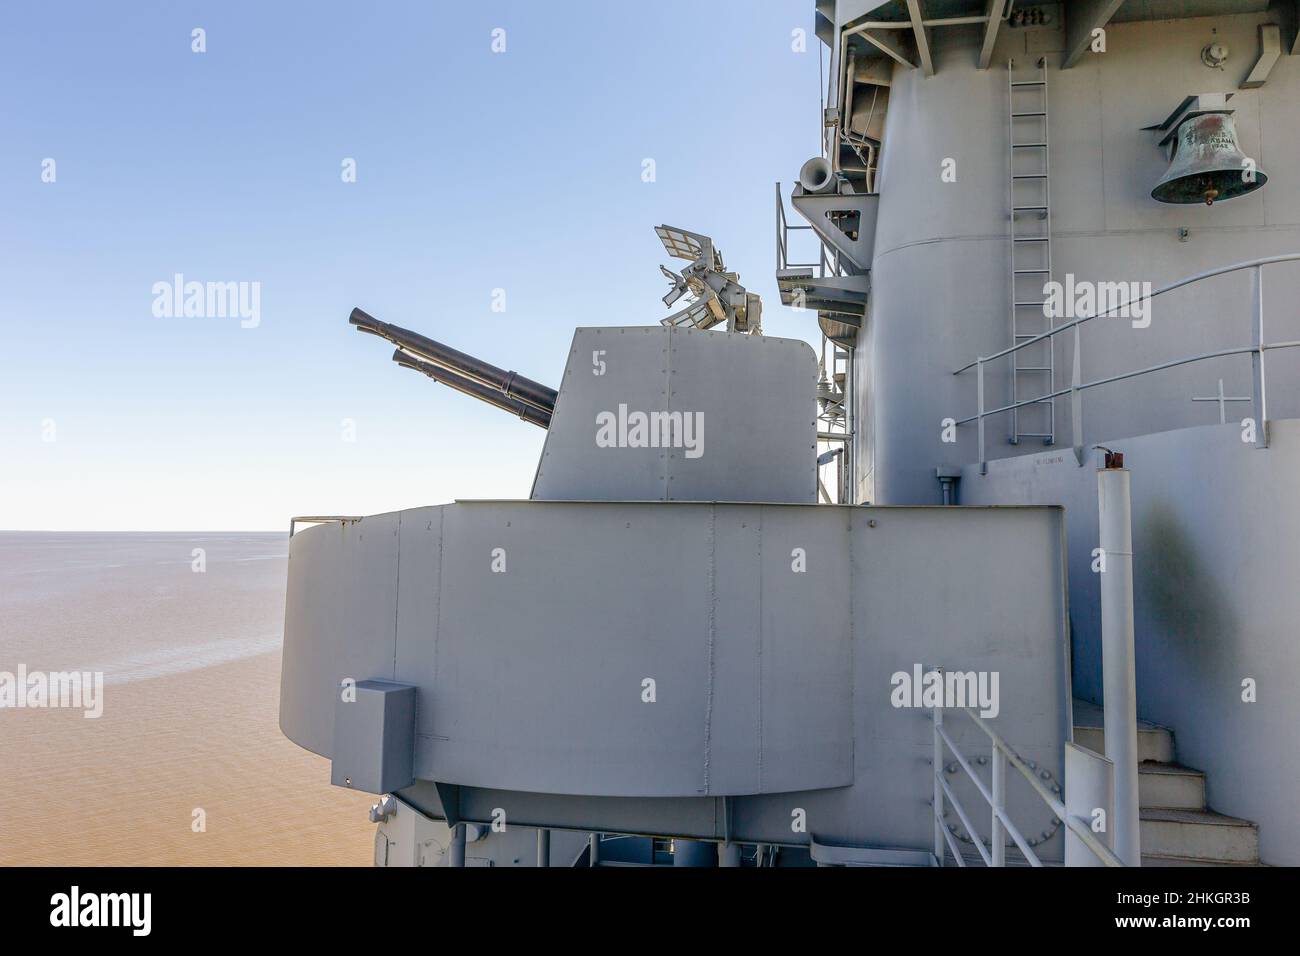 Anti-aircraft gun turret on the USS Alabama (BB-60), a battleship that served in World War II.  Concepts could include history, war, defense, navy, ot Stock Photo